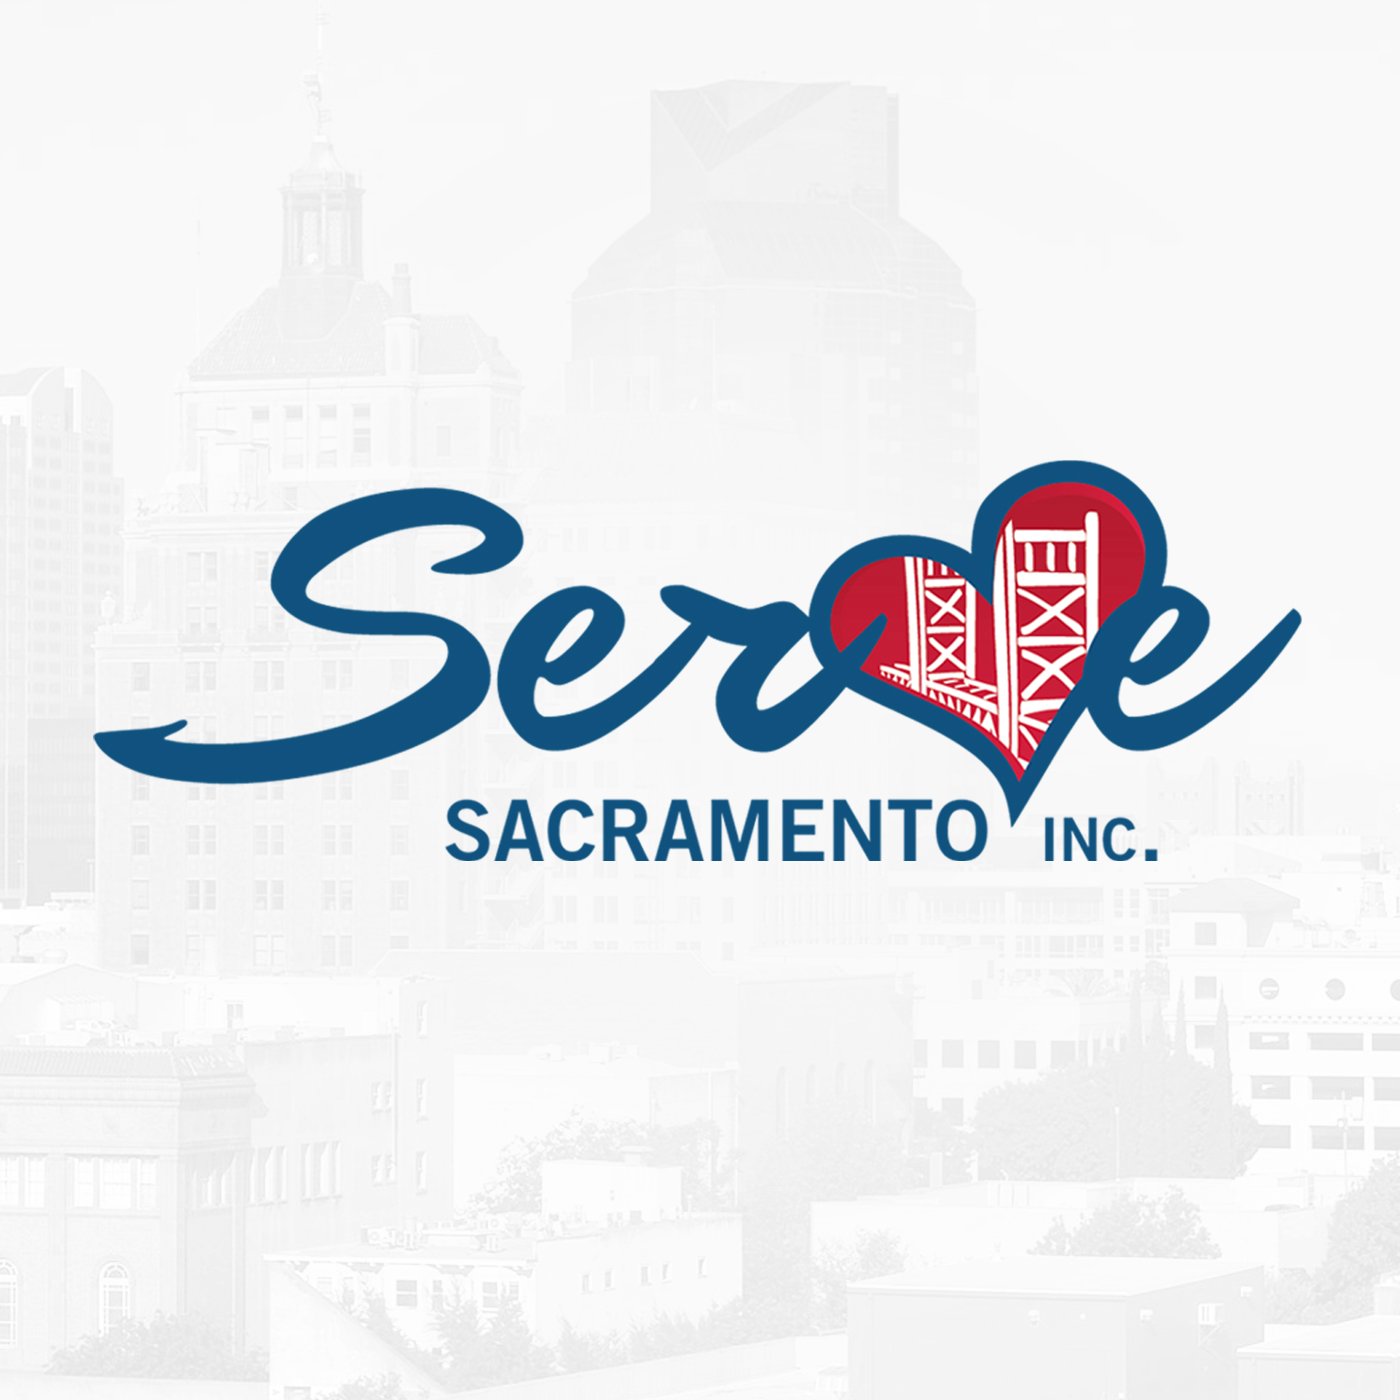 Serve Sacramento Inc. is a non-profit committed to providing life-changing service to those in need in the greater Sacramento region.